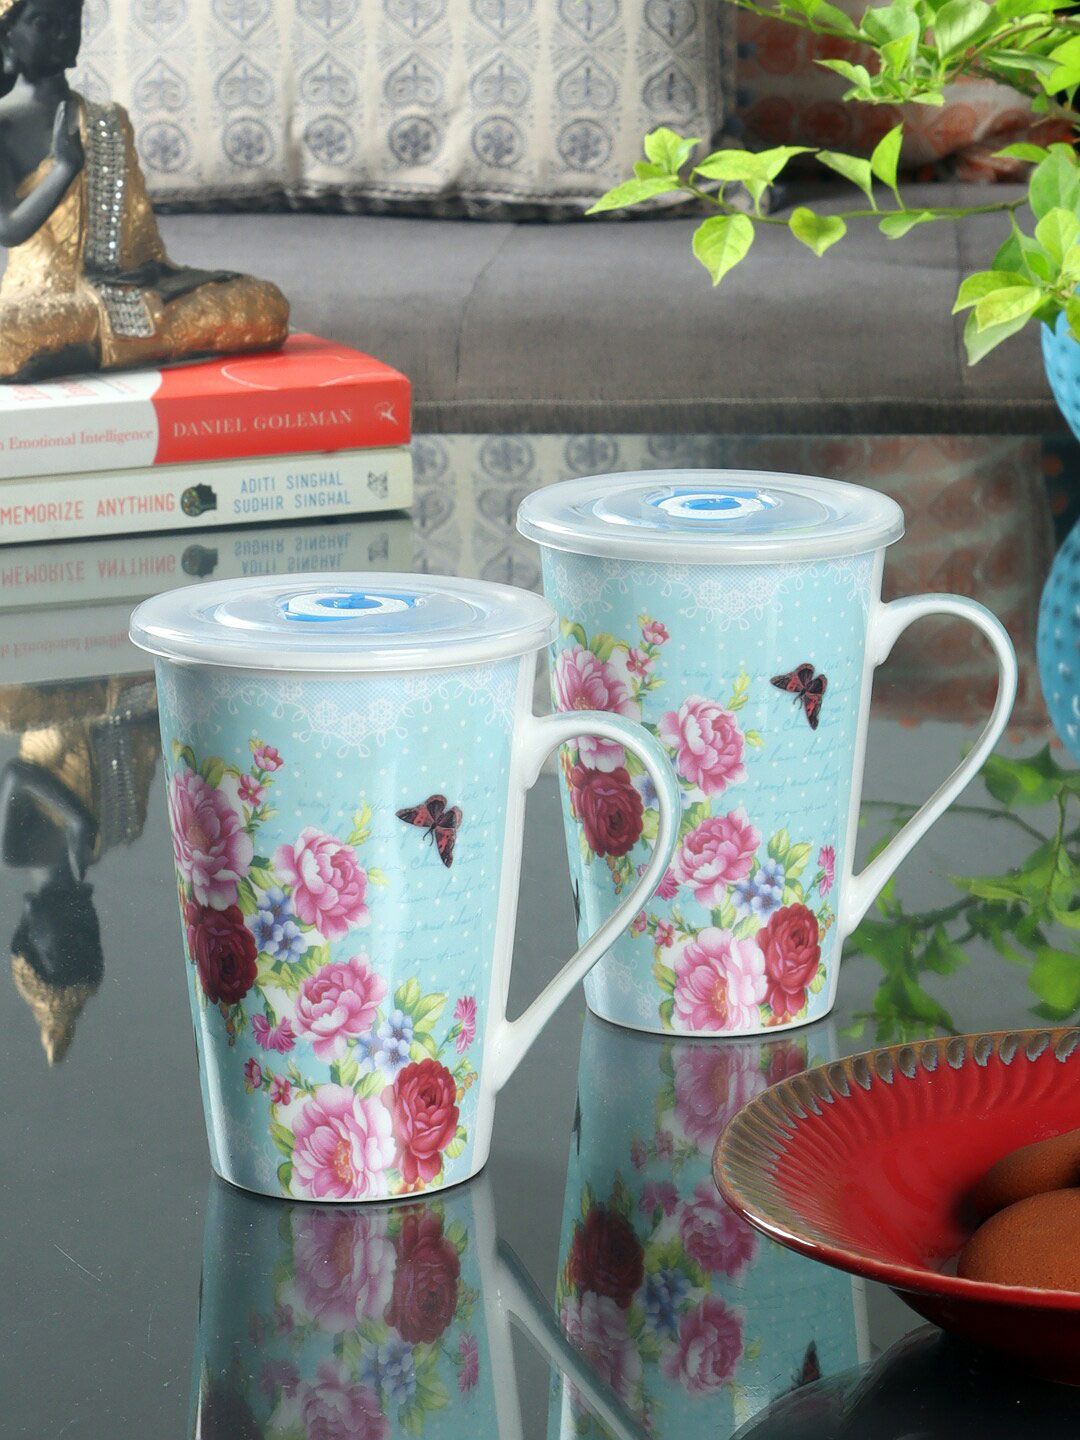 ceradeco Blue & Yellow Printed Ceramic Glossy Mugs Set of Cups and Mugs Price in India